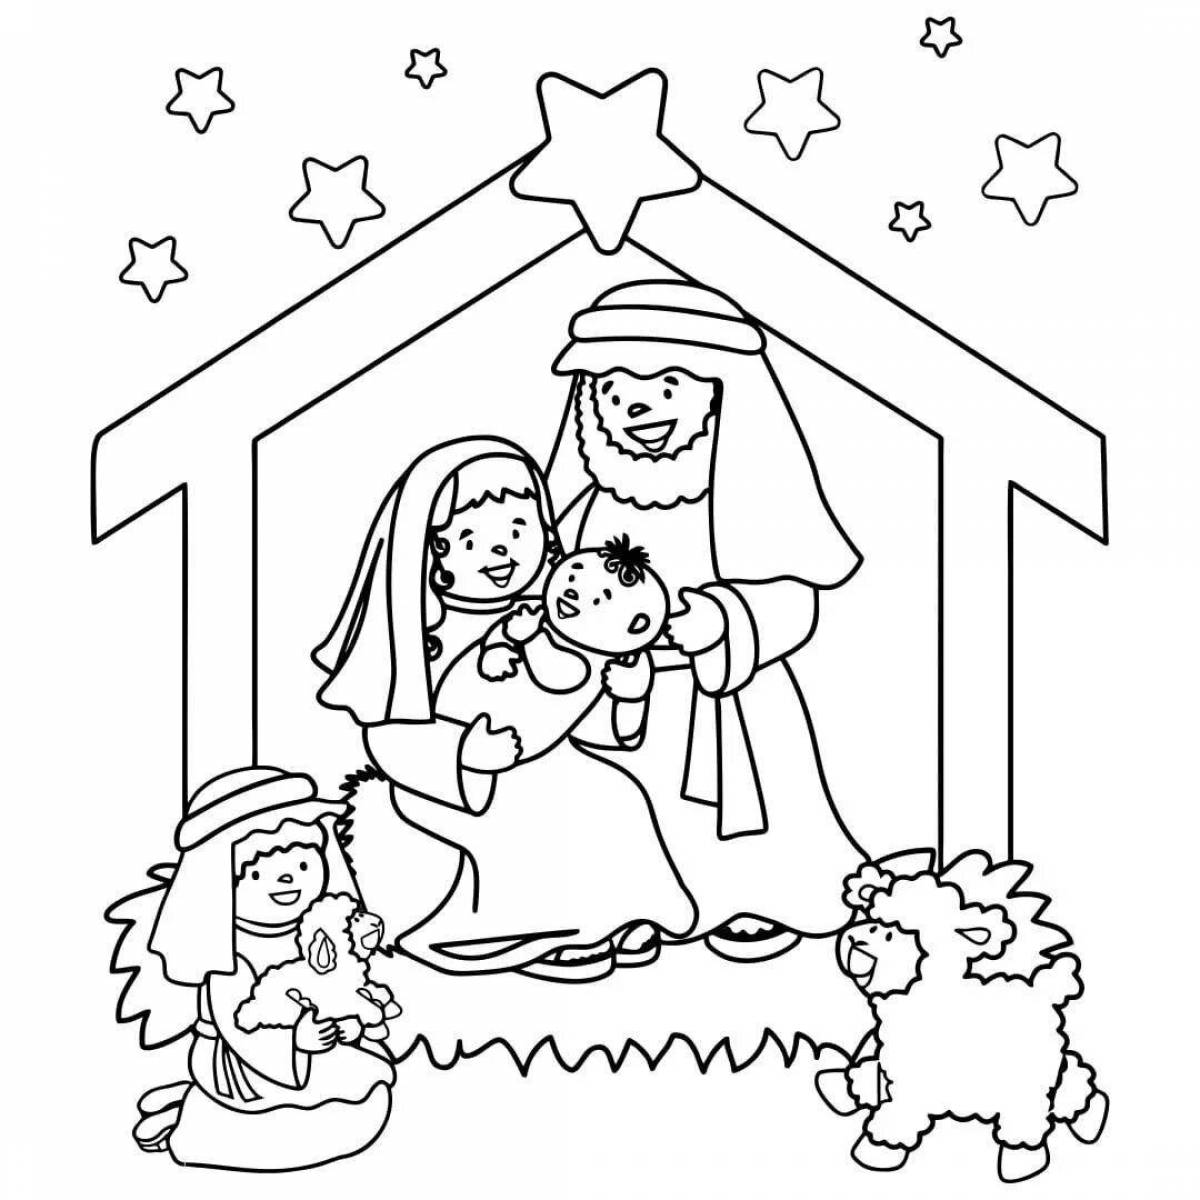 Coloring book great christmas eve